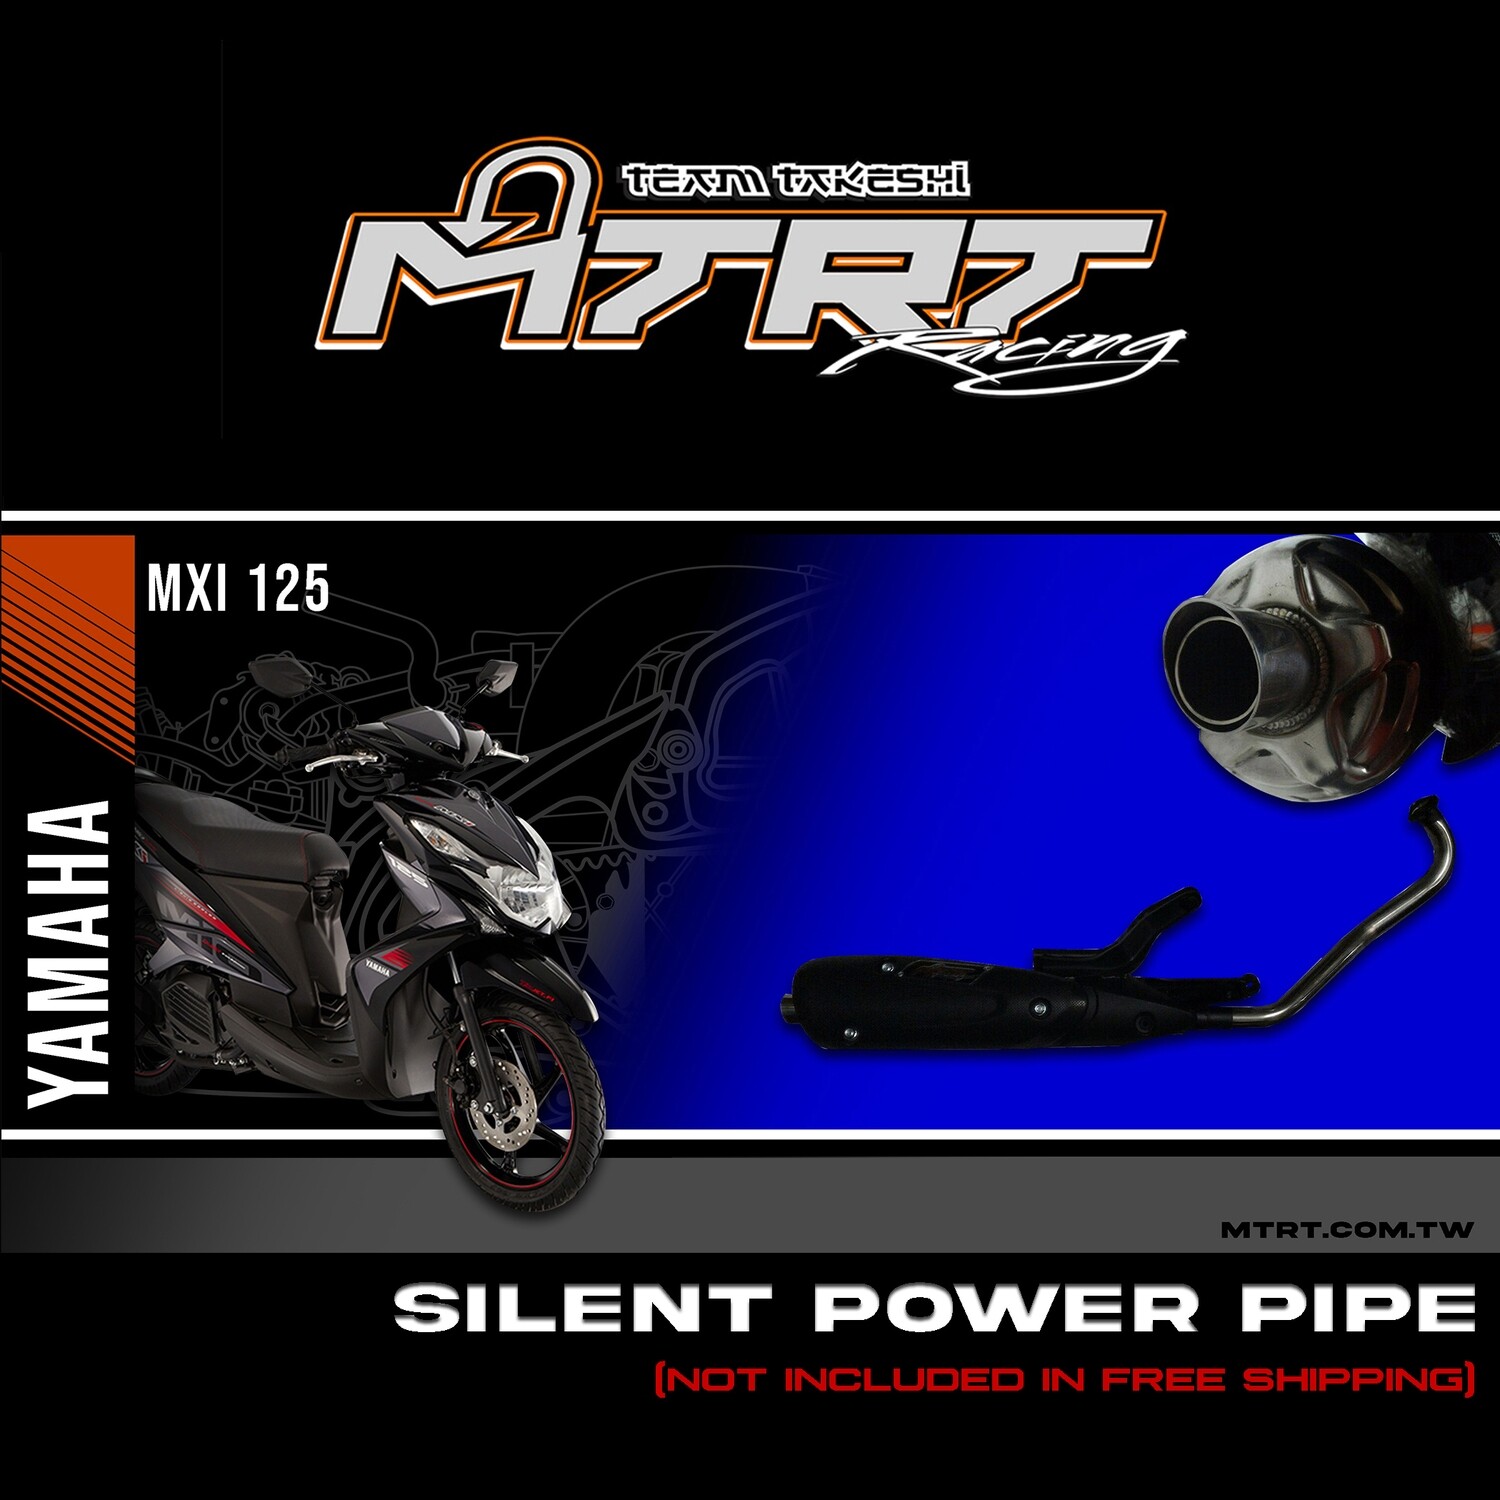 SILENT POWER PIPE